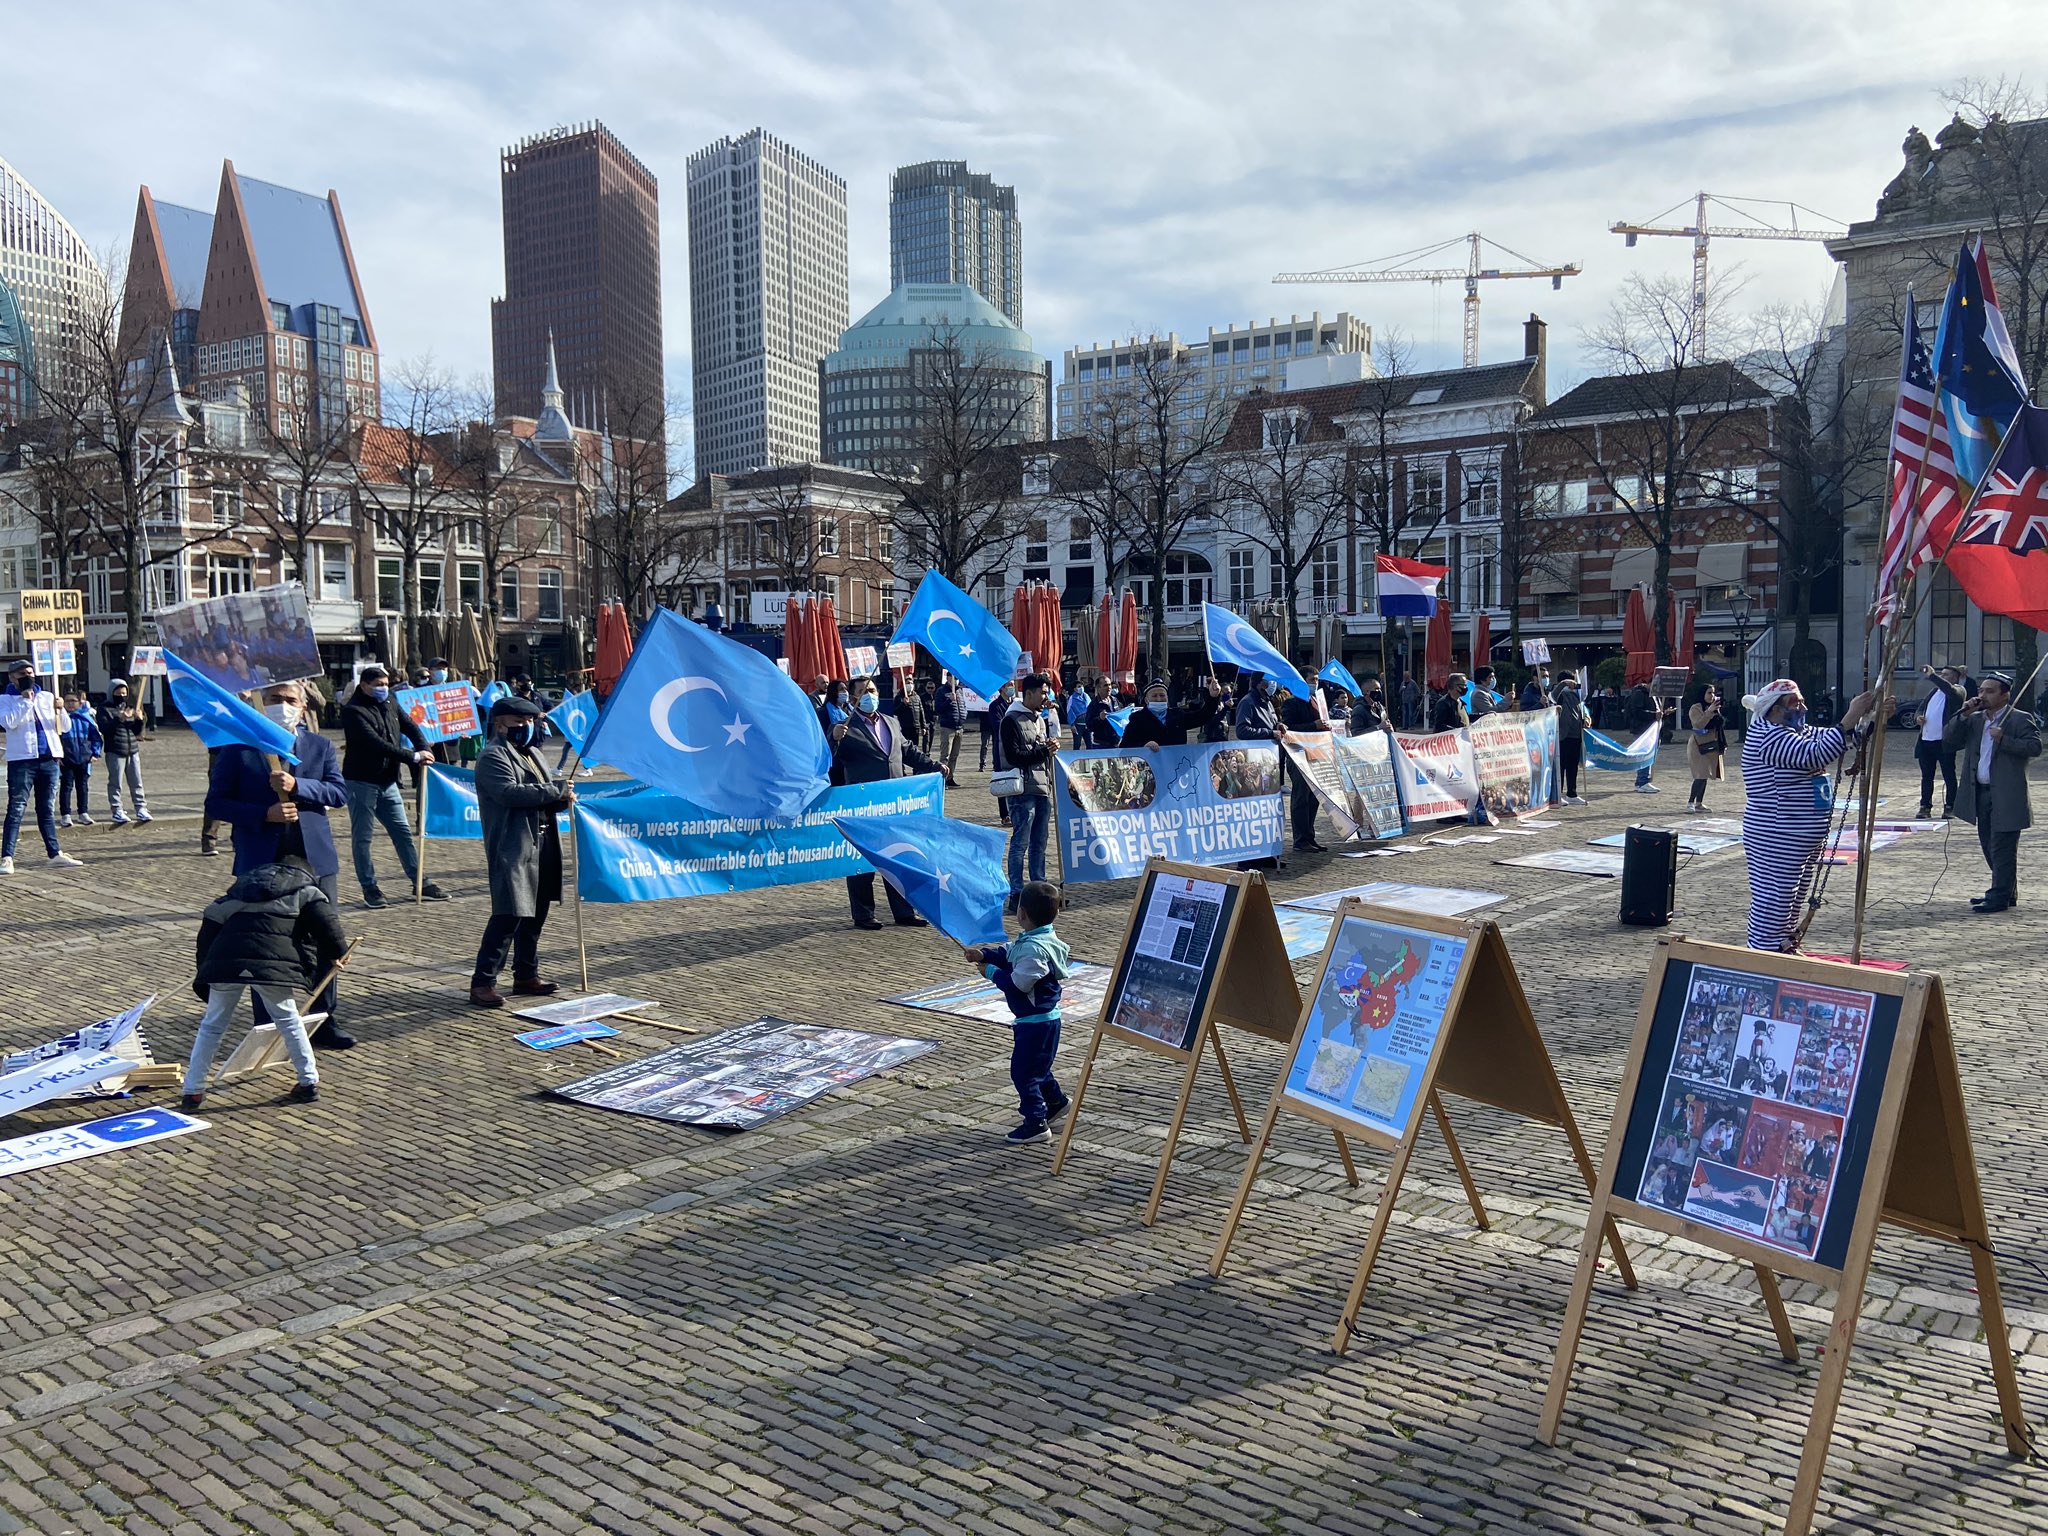 PRESS RELEASE: WUC APPLAUDS PASSED MOTION ON UYGHUR GENOCIDE IN DUTCH PARLIAMENT